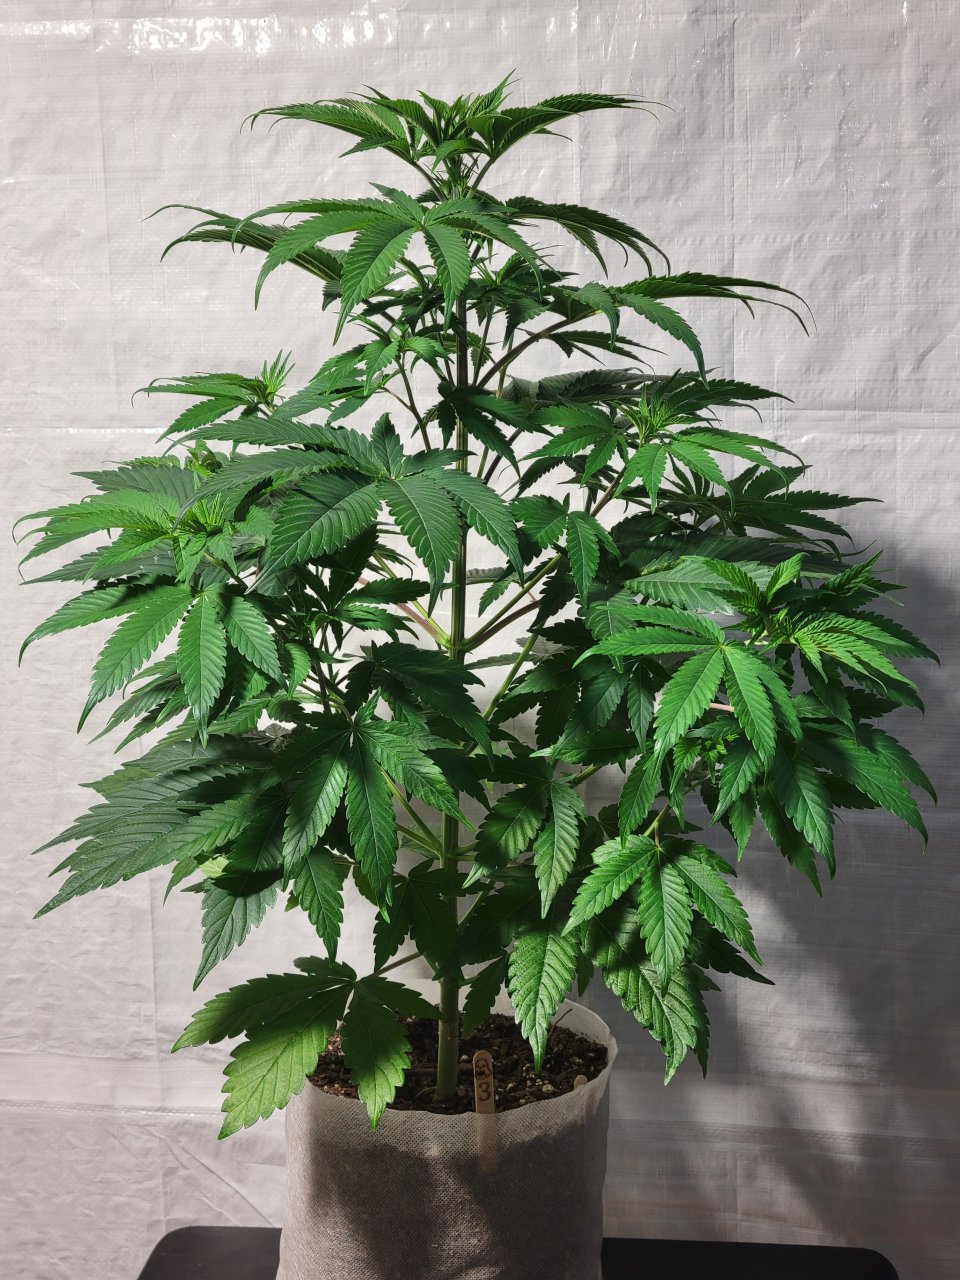 Purple Ghost Candy #3 front day 59